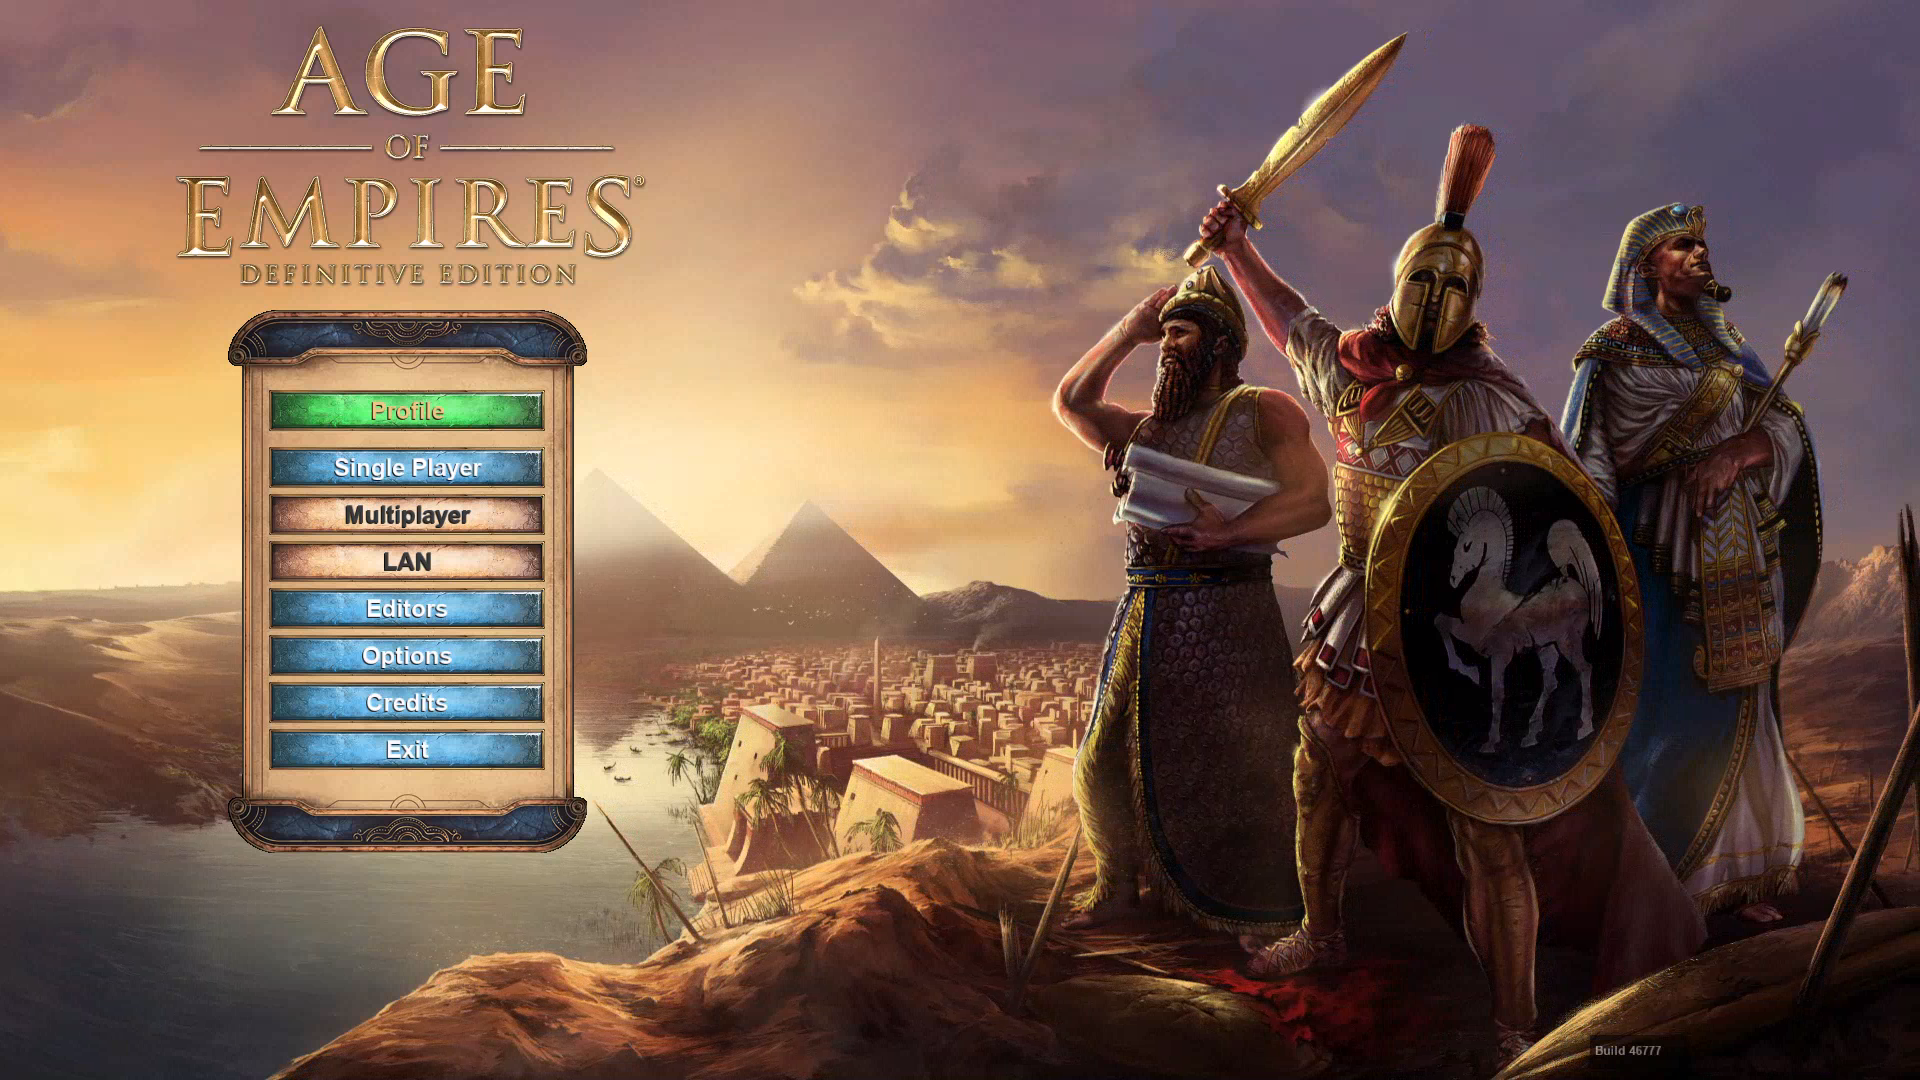 Age of empires 3 in steam фото 61